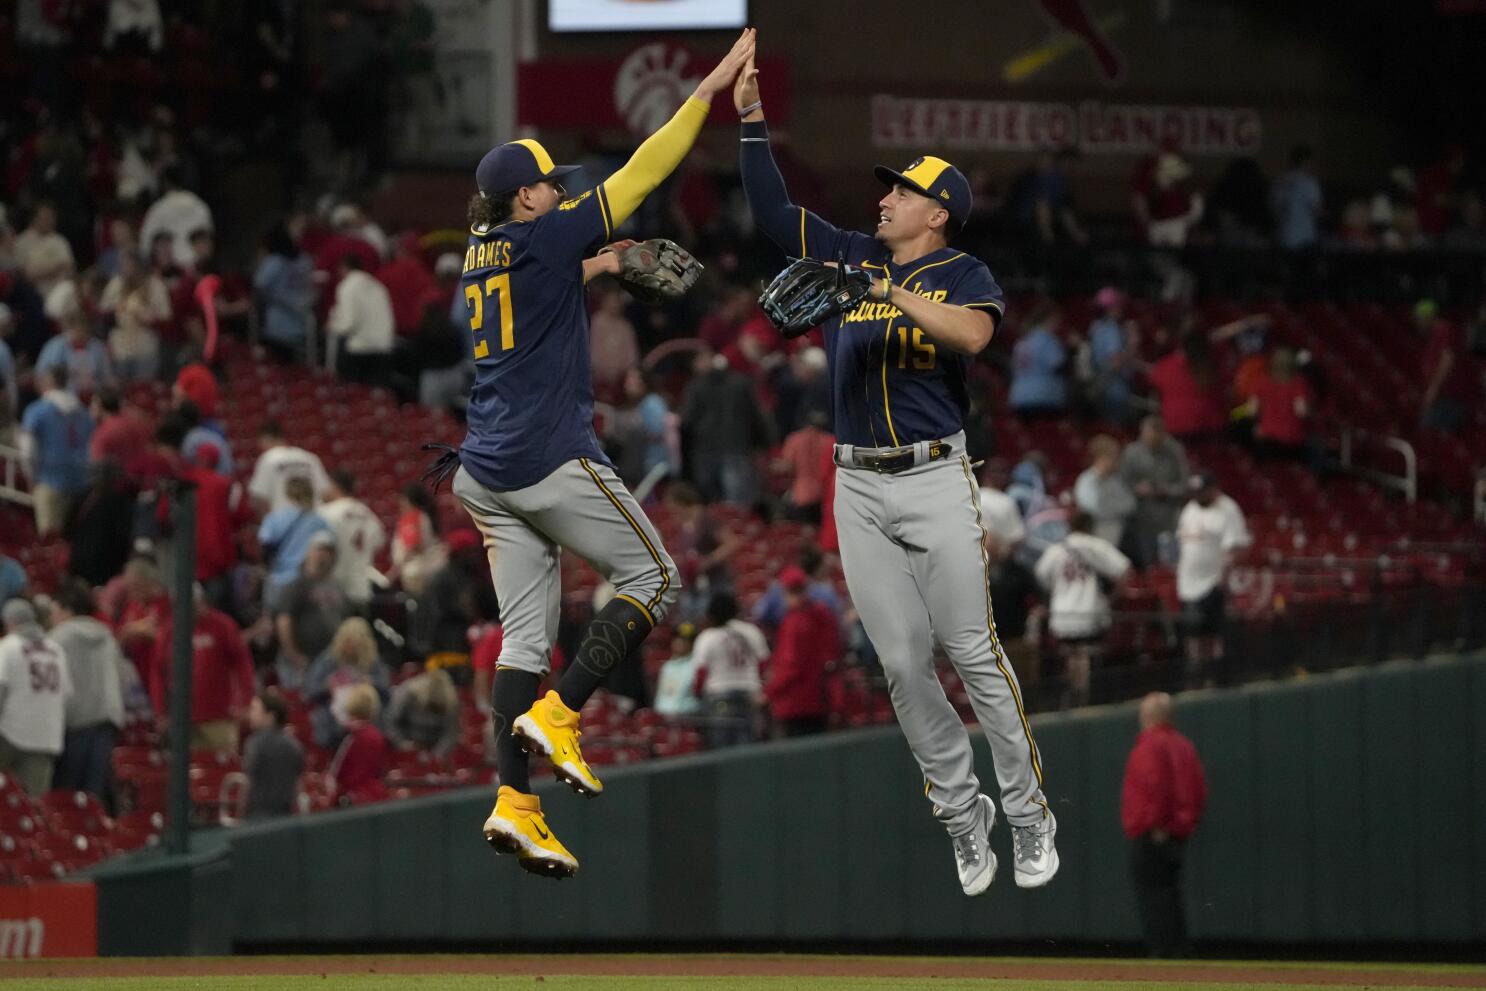 Wiemer, Anderson homer in Brewers' 3-2 victory over Cardinals - The San  Diego Union-Tribune